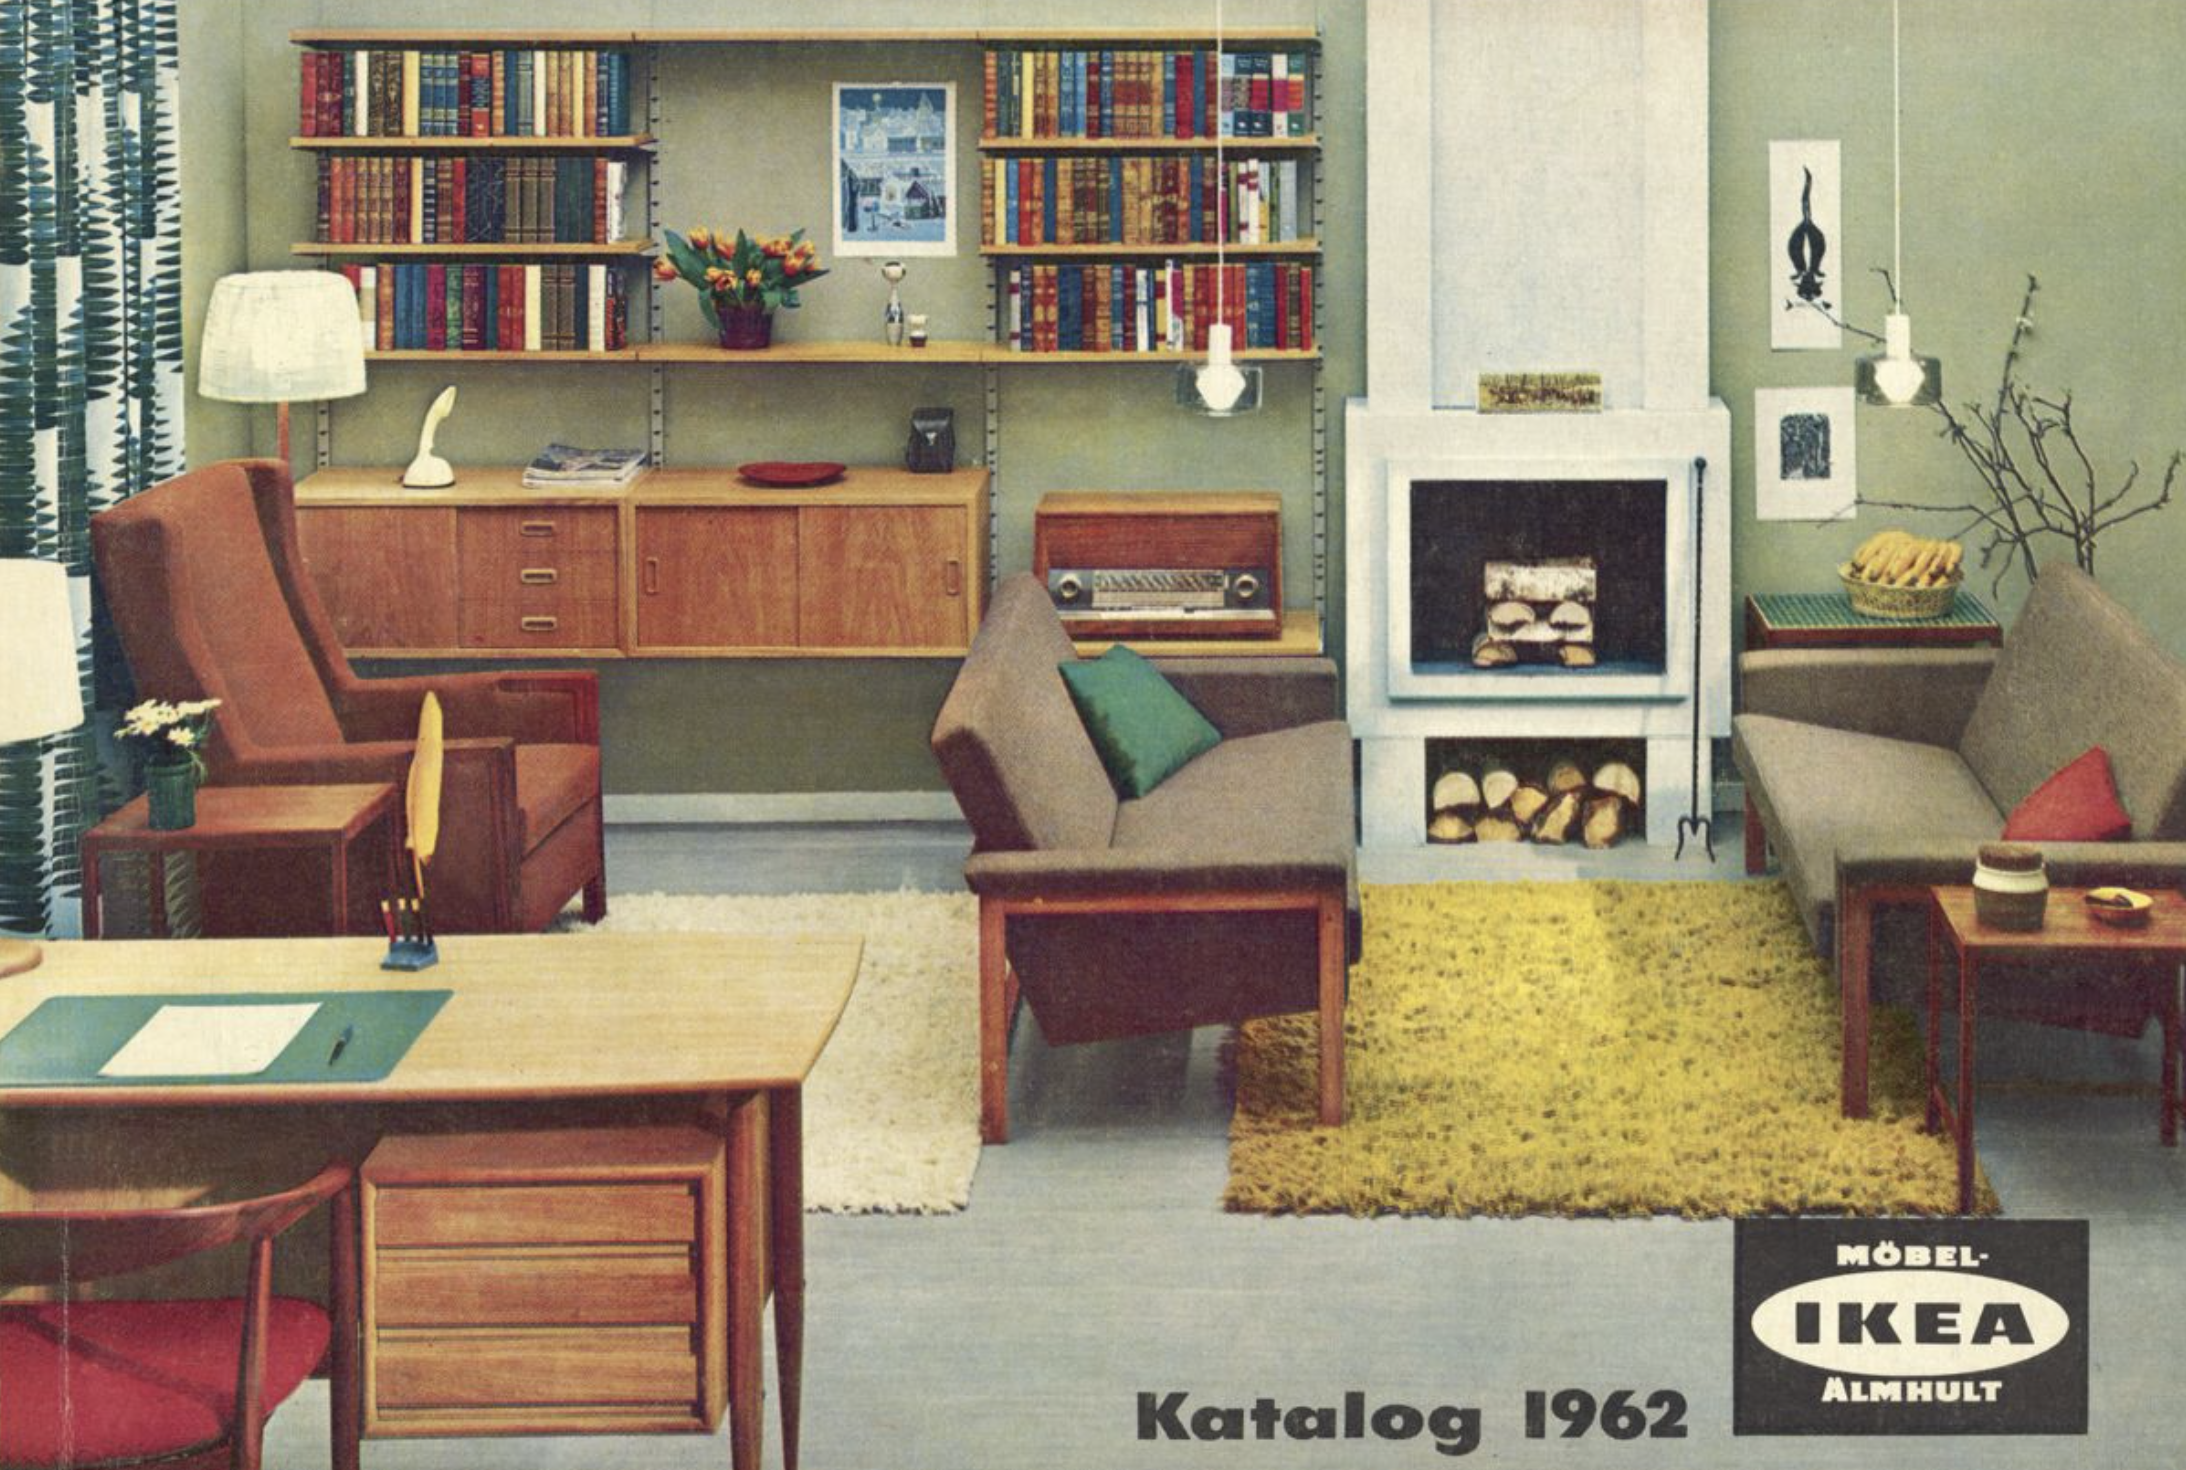 5 best catalog covers to celebrate the of an era | Homes